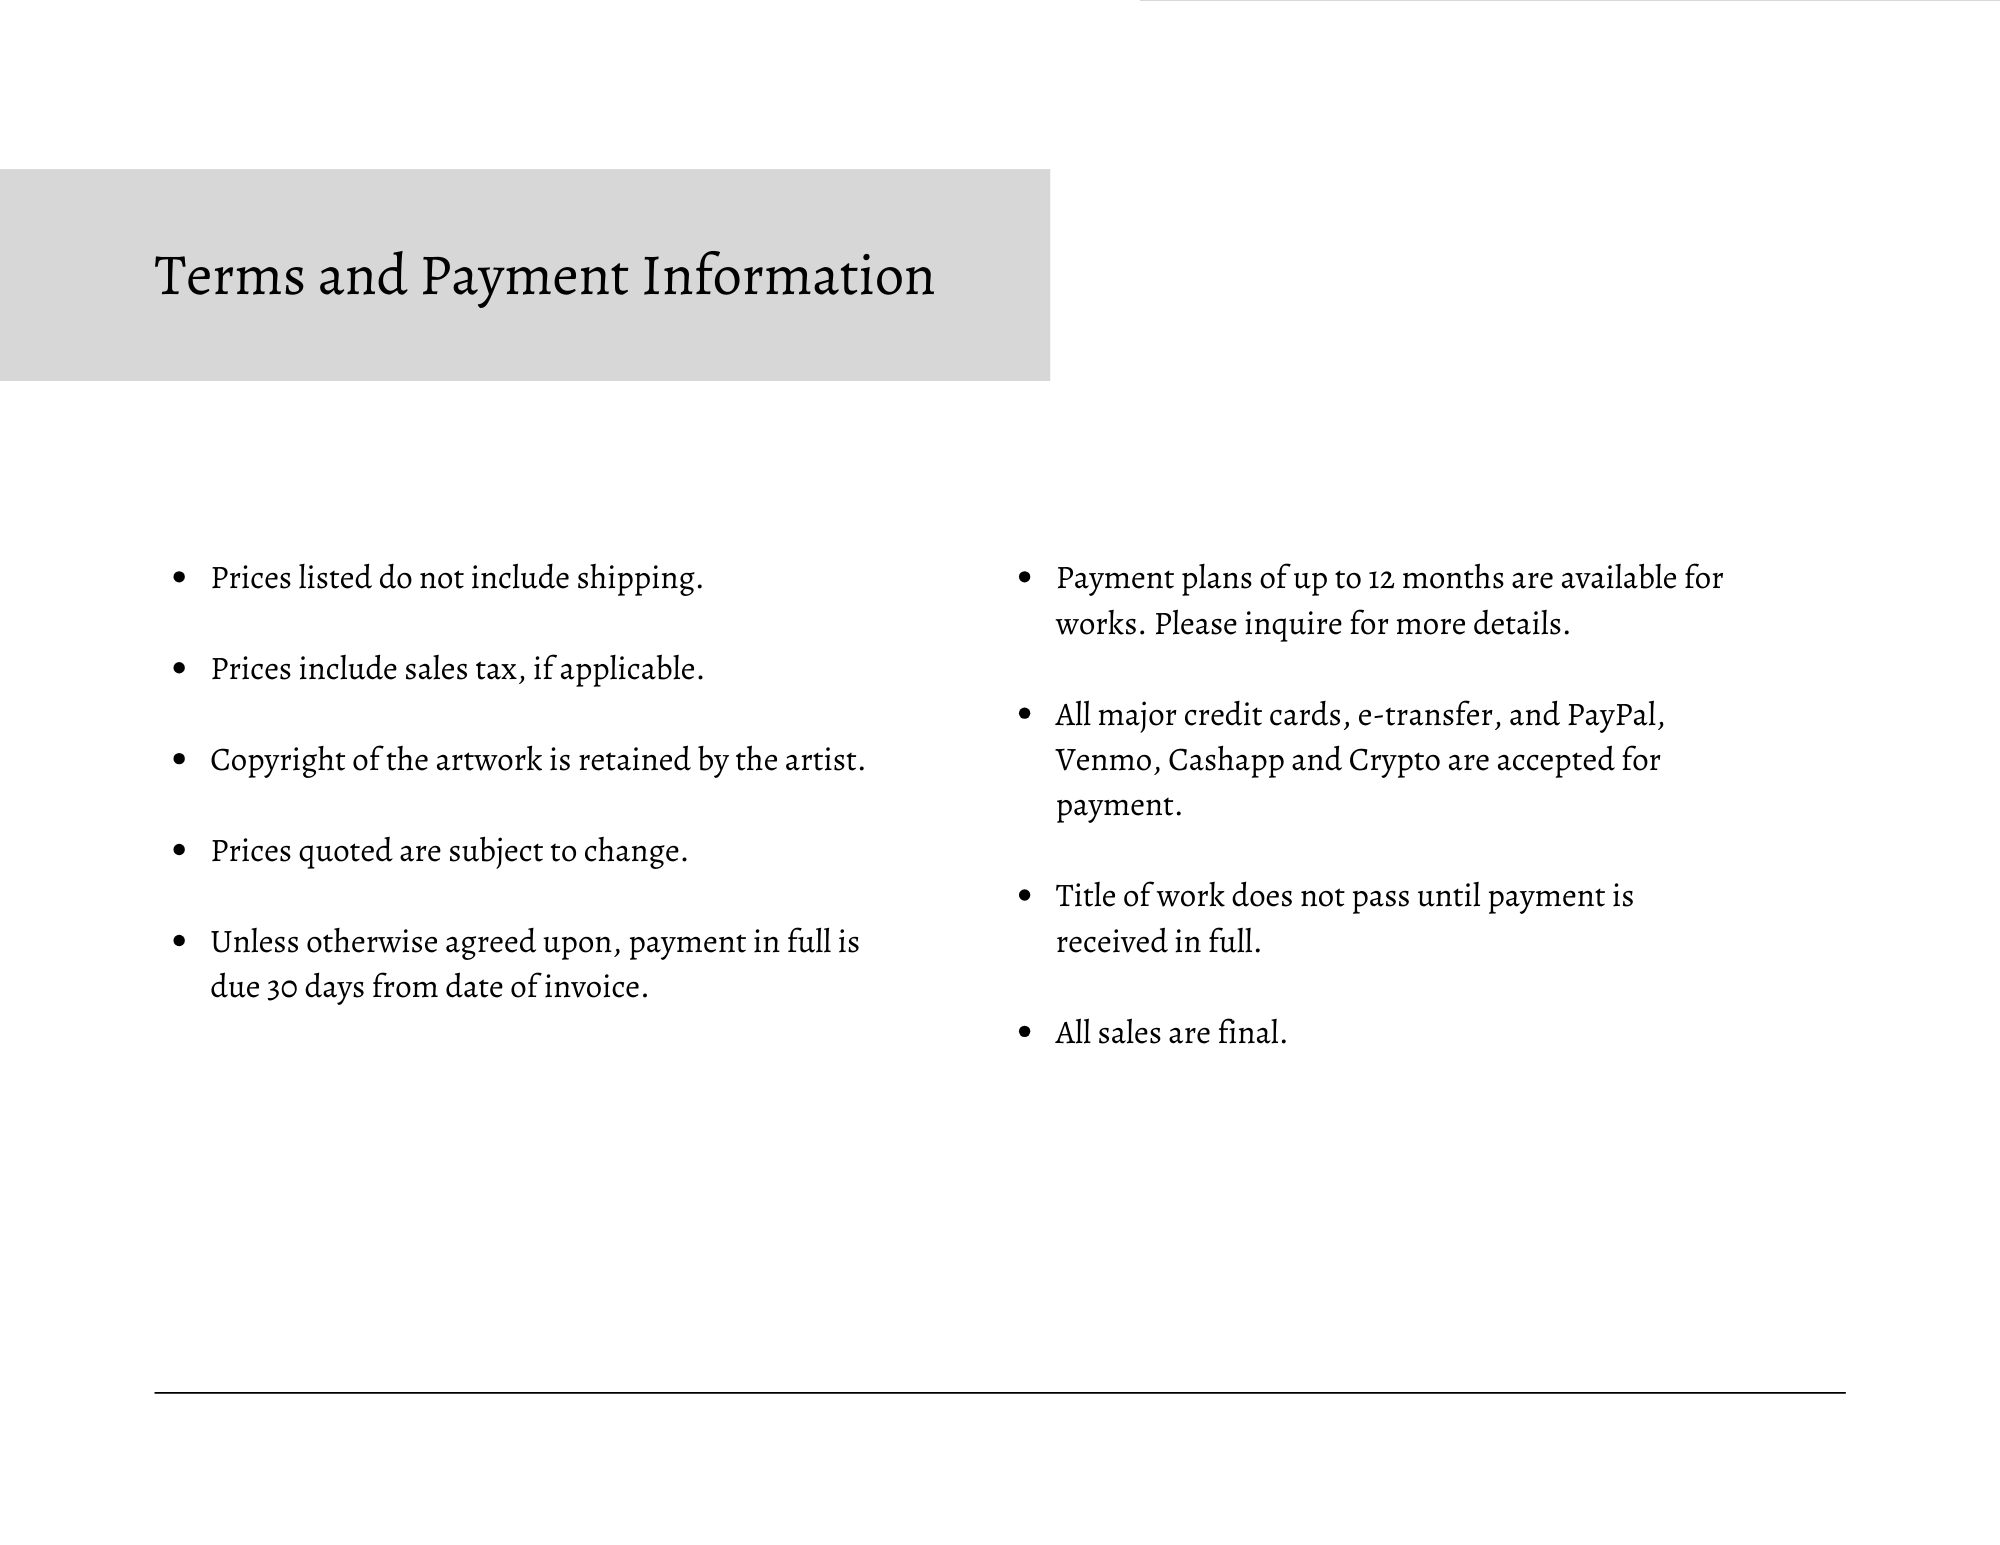 Terms and Payment Information.png